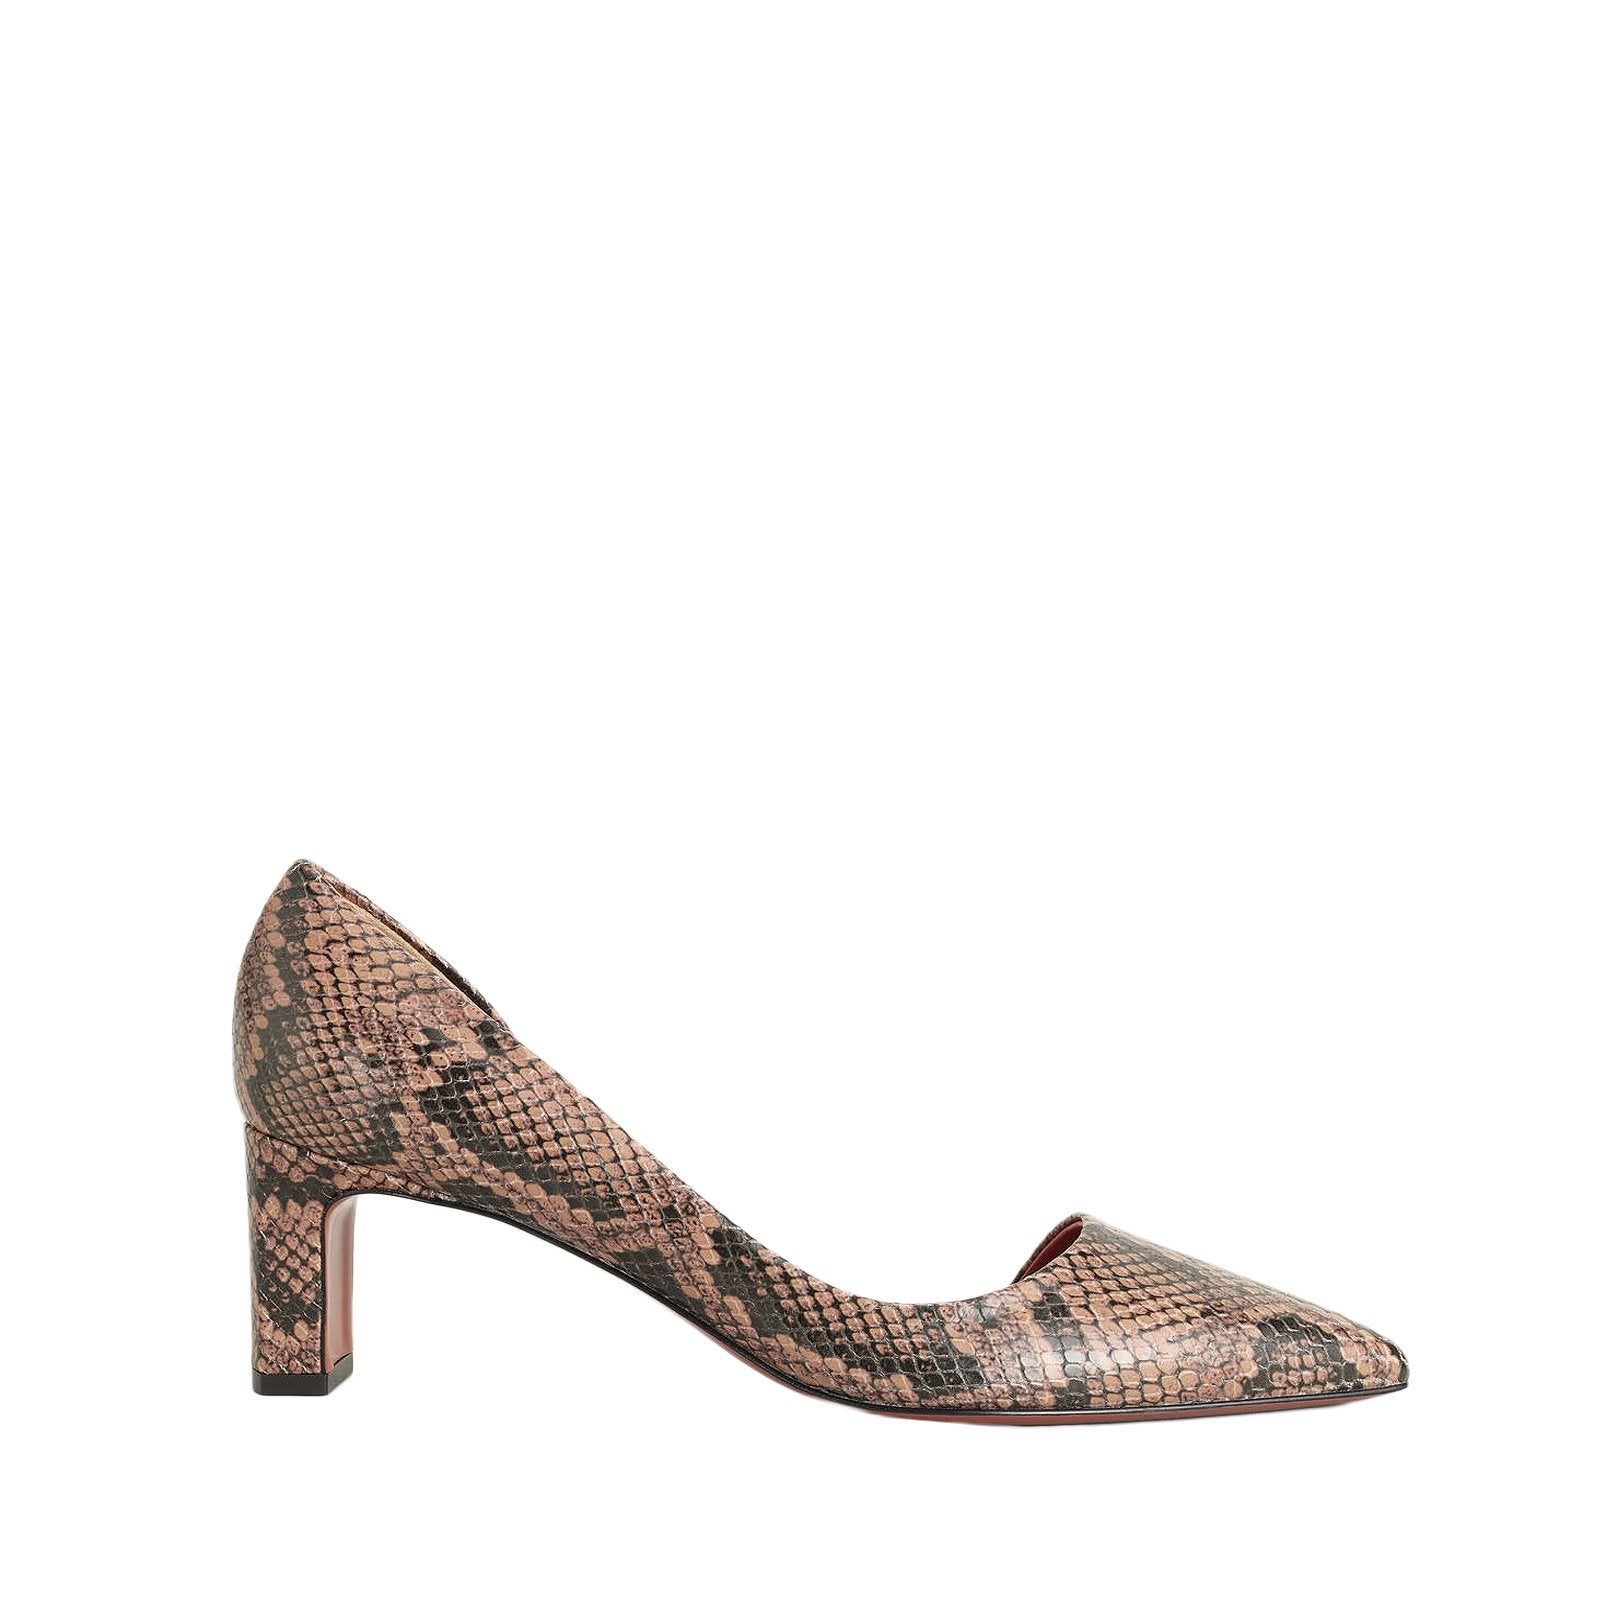 Carmiano Brown Printed Snake Shoes Heels 110832  - 1